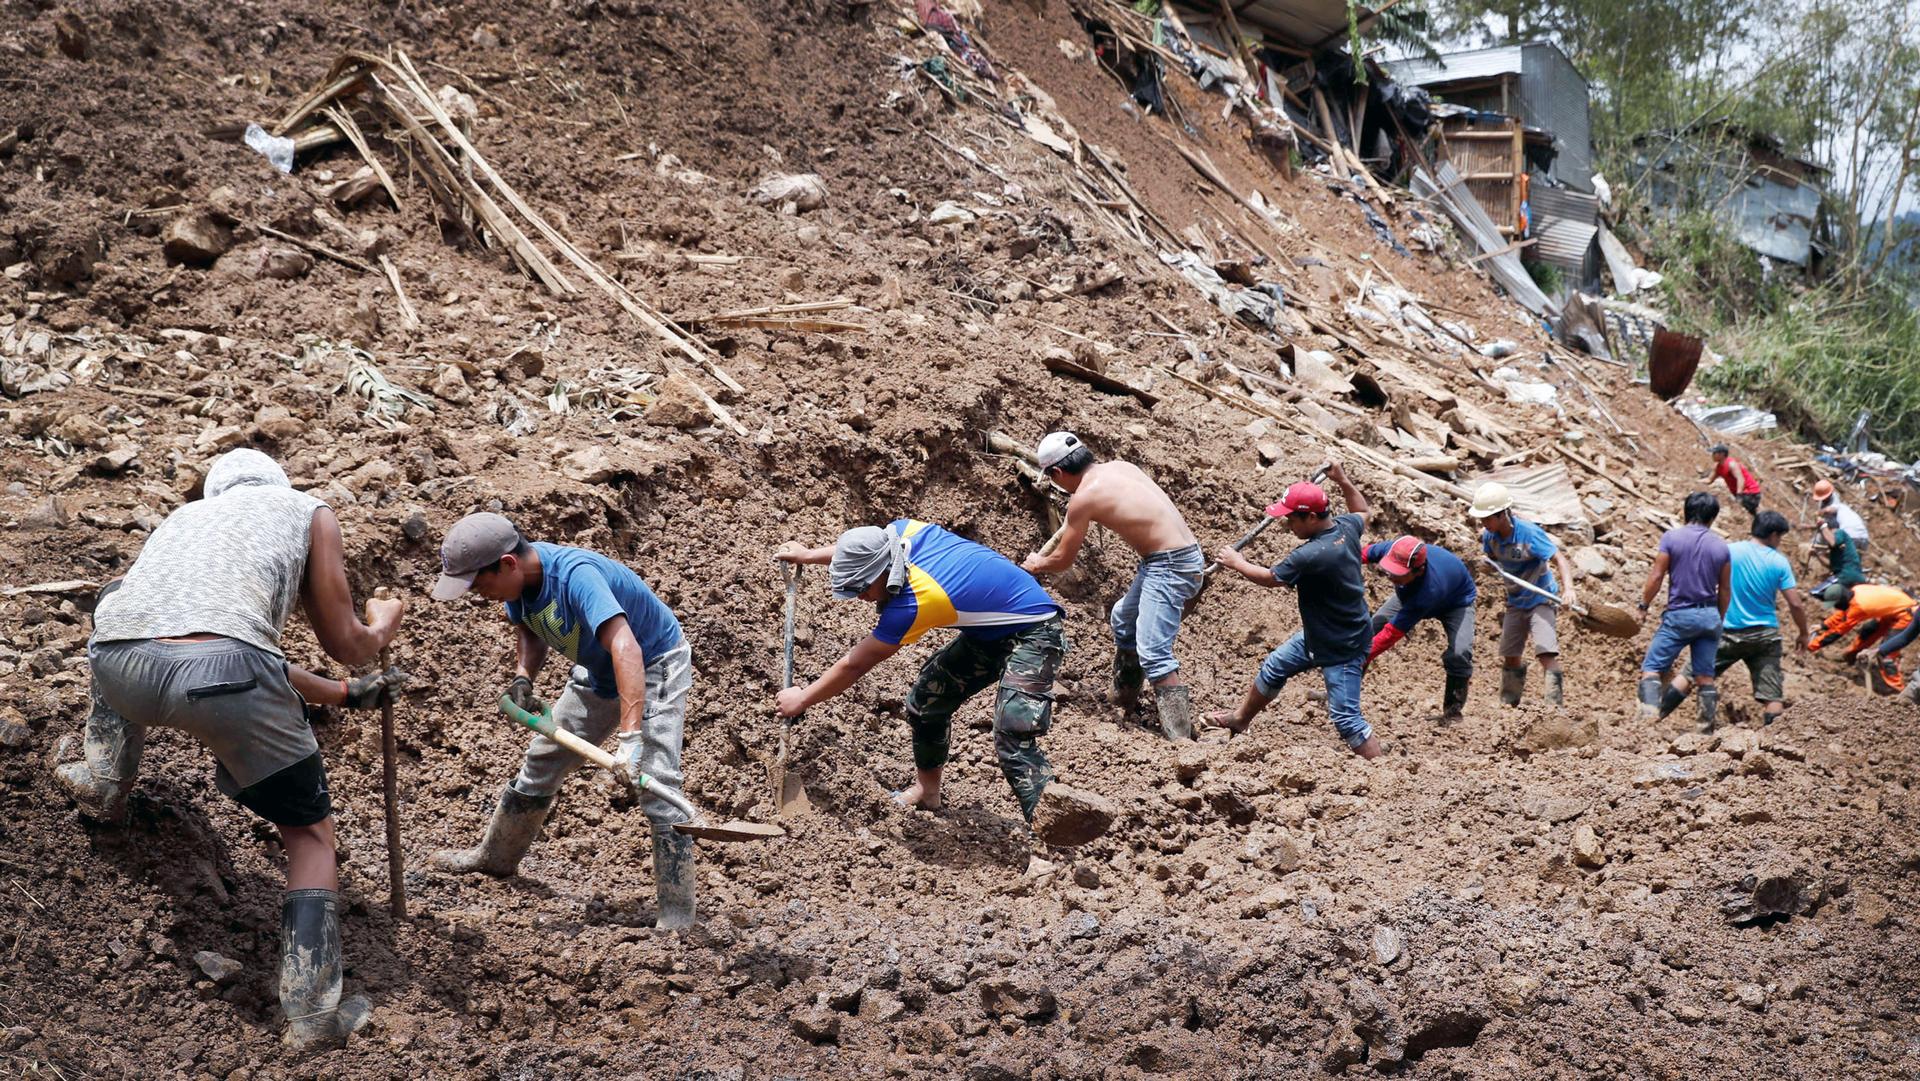 A row of men with shovels stand on a hillside covered in debris and loose mud after a mudslide covered a mining town